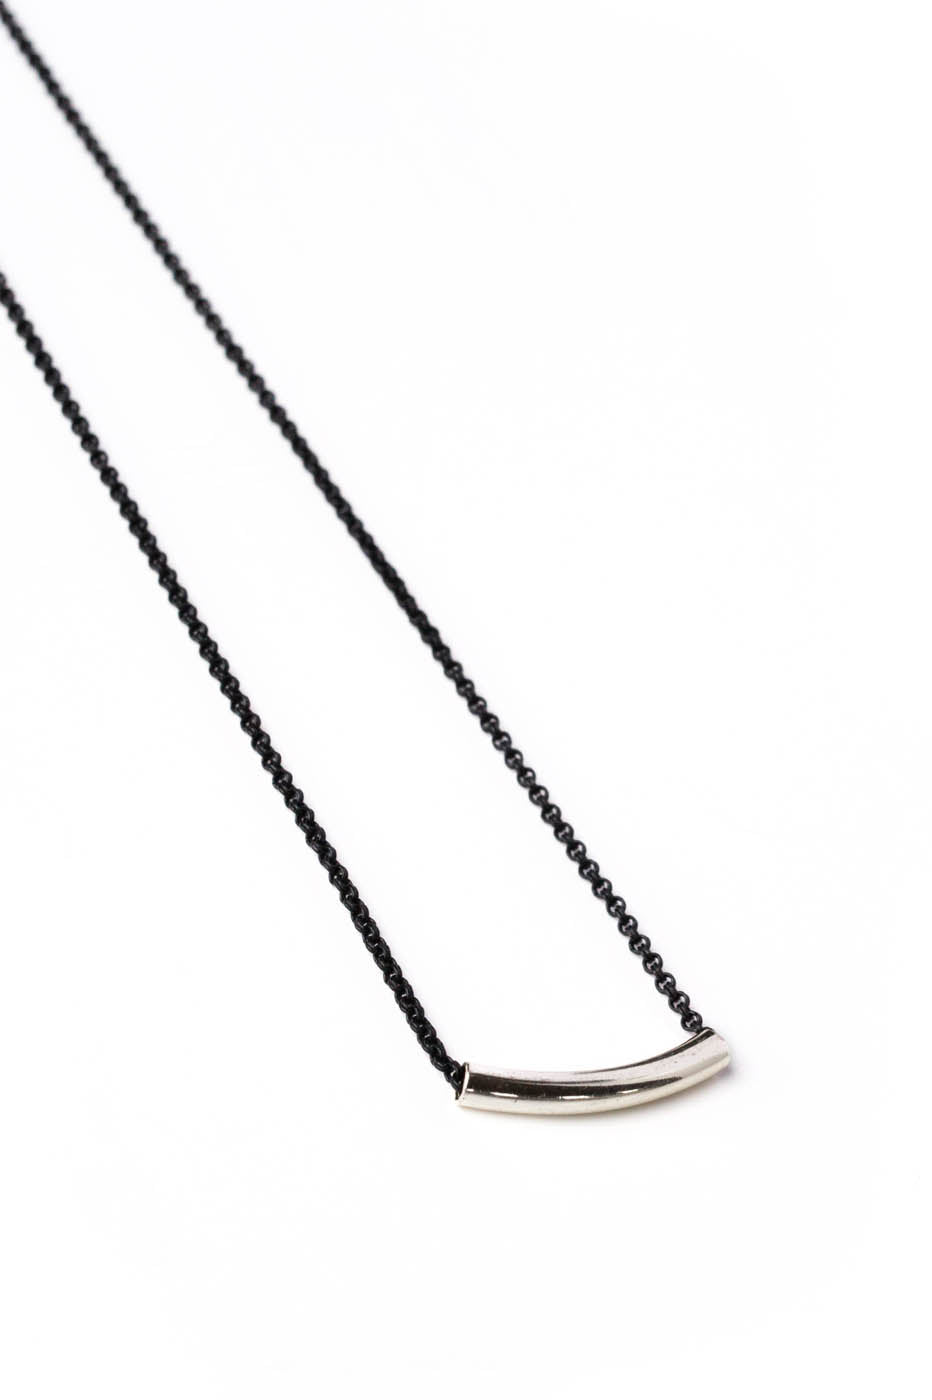 Small Silver Curve Bar on Black Chain Necklace